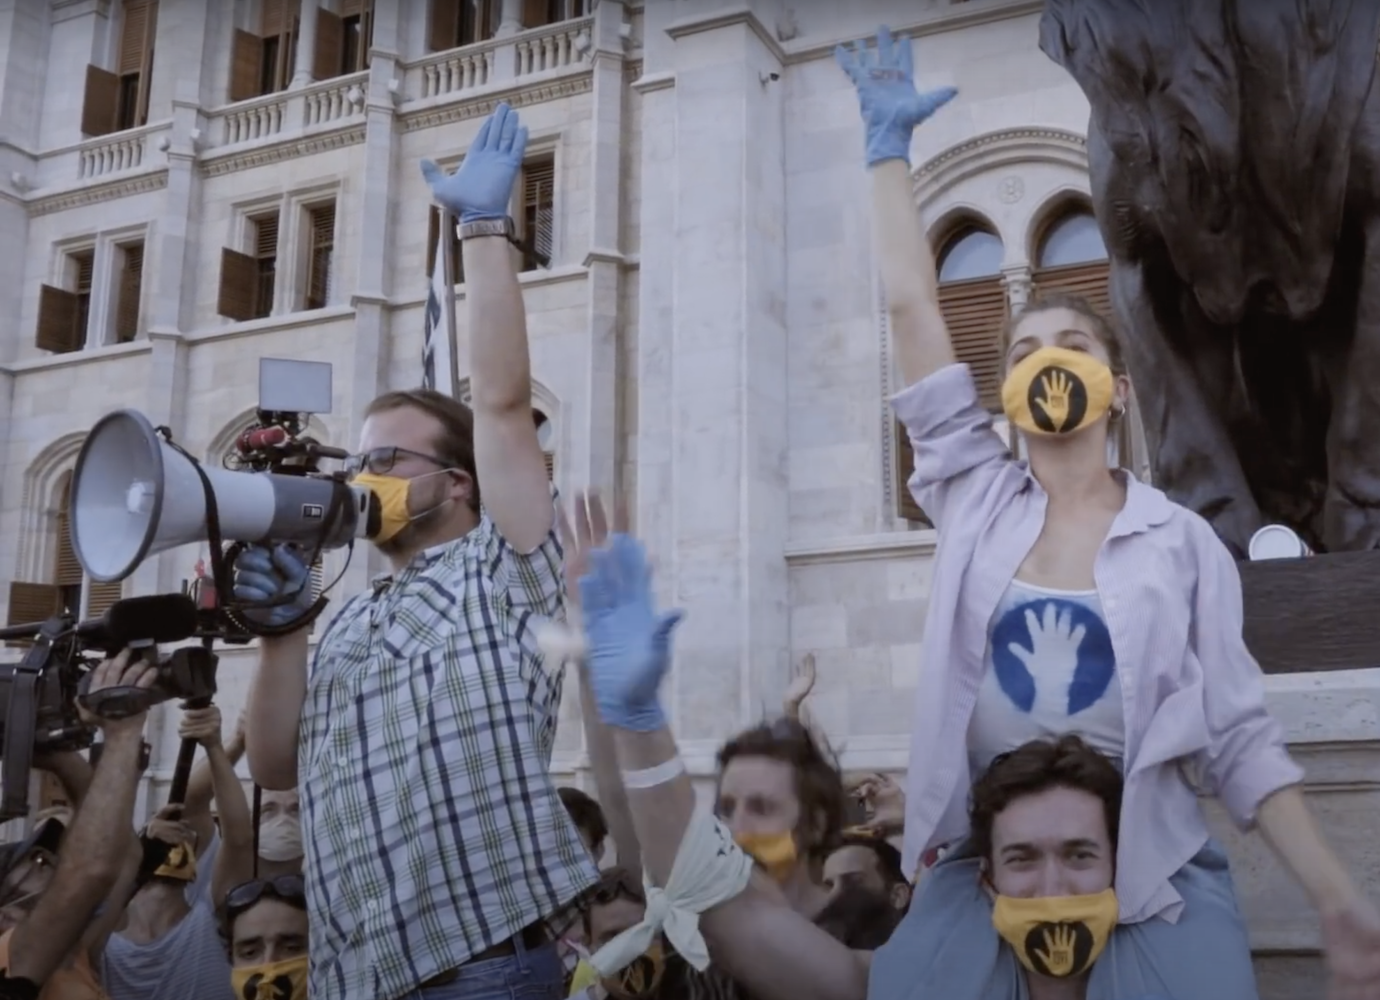 Watch the documentary capturing the dissidence of Hungary’s 2020 student blockades